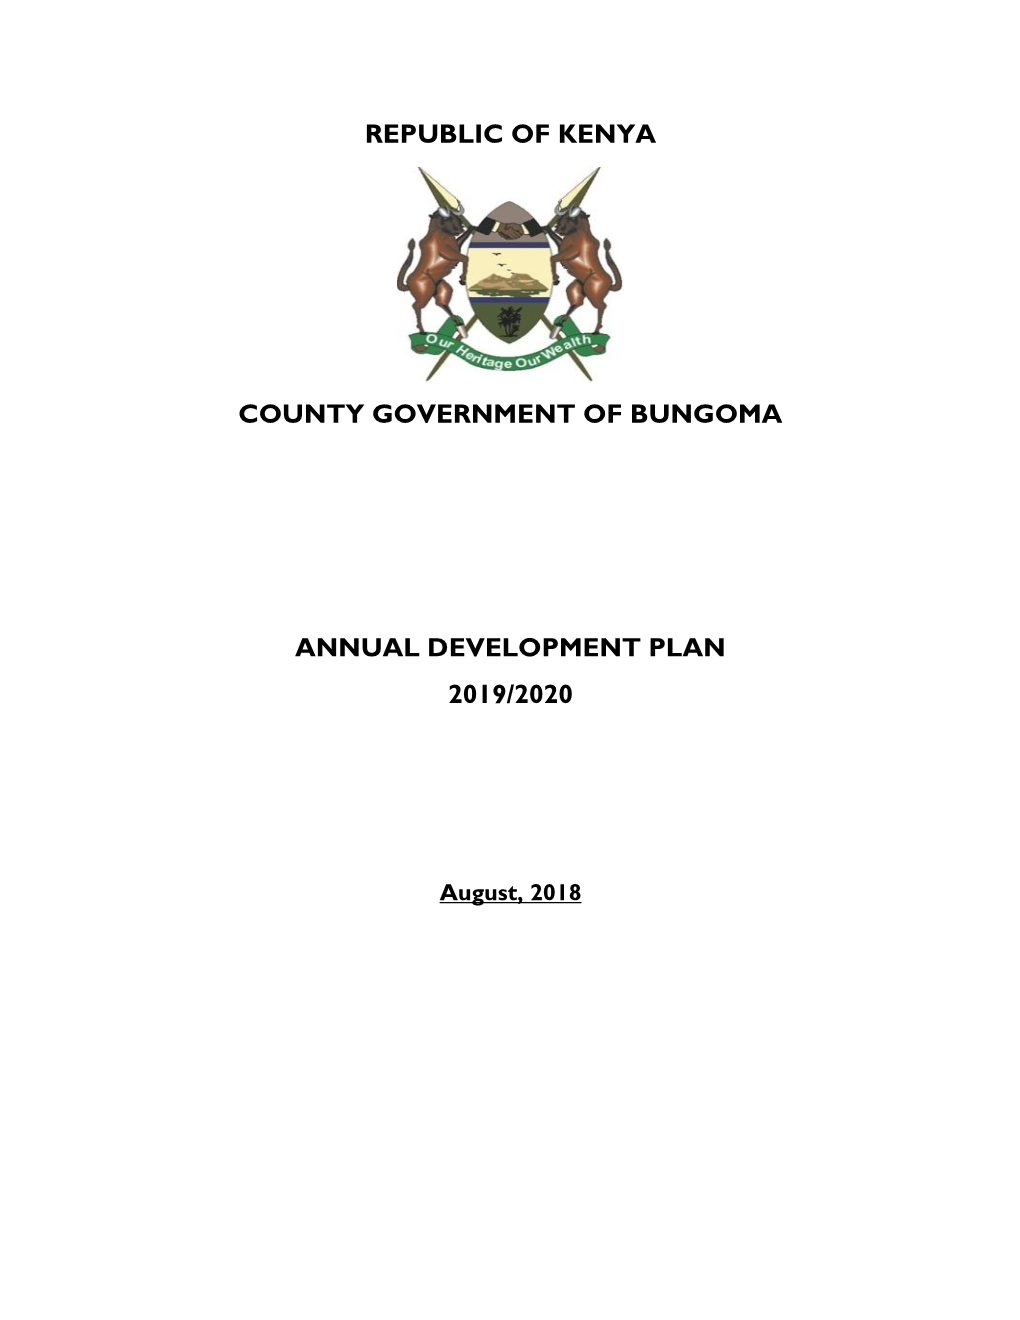 Republic of Kenya County Government of Bungoma